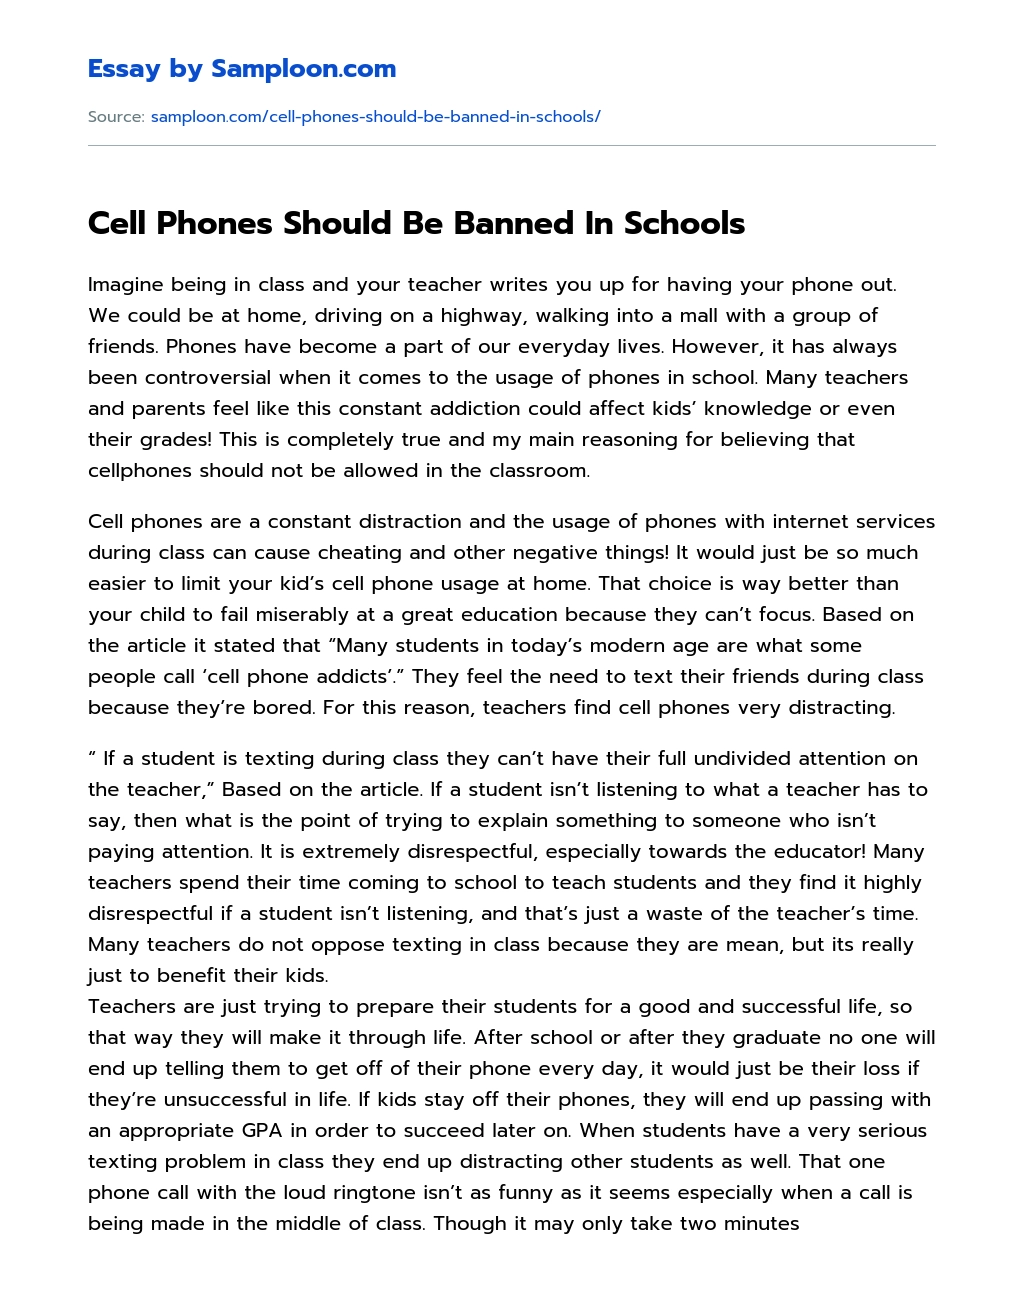 Cell Phones Should Be Banned In Schools essay